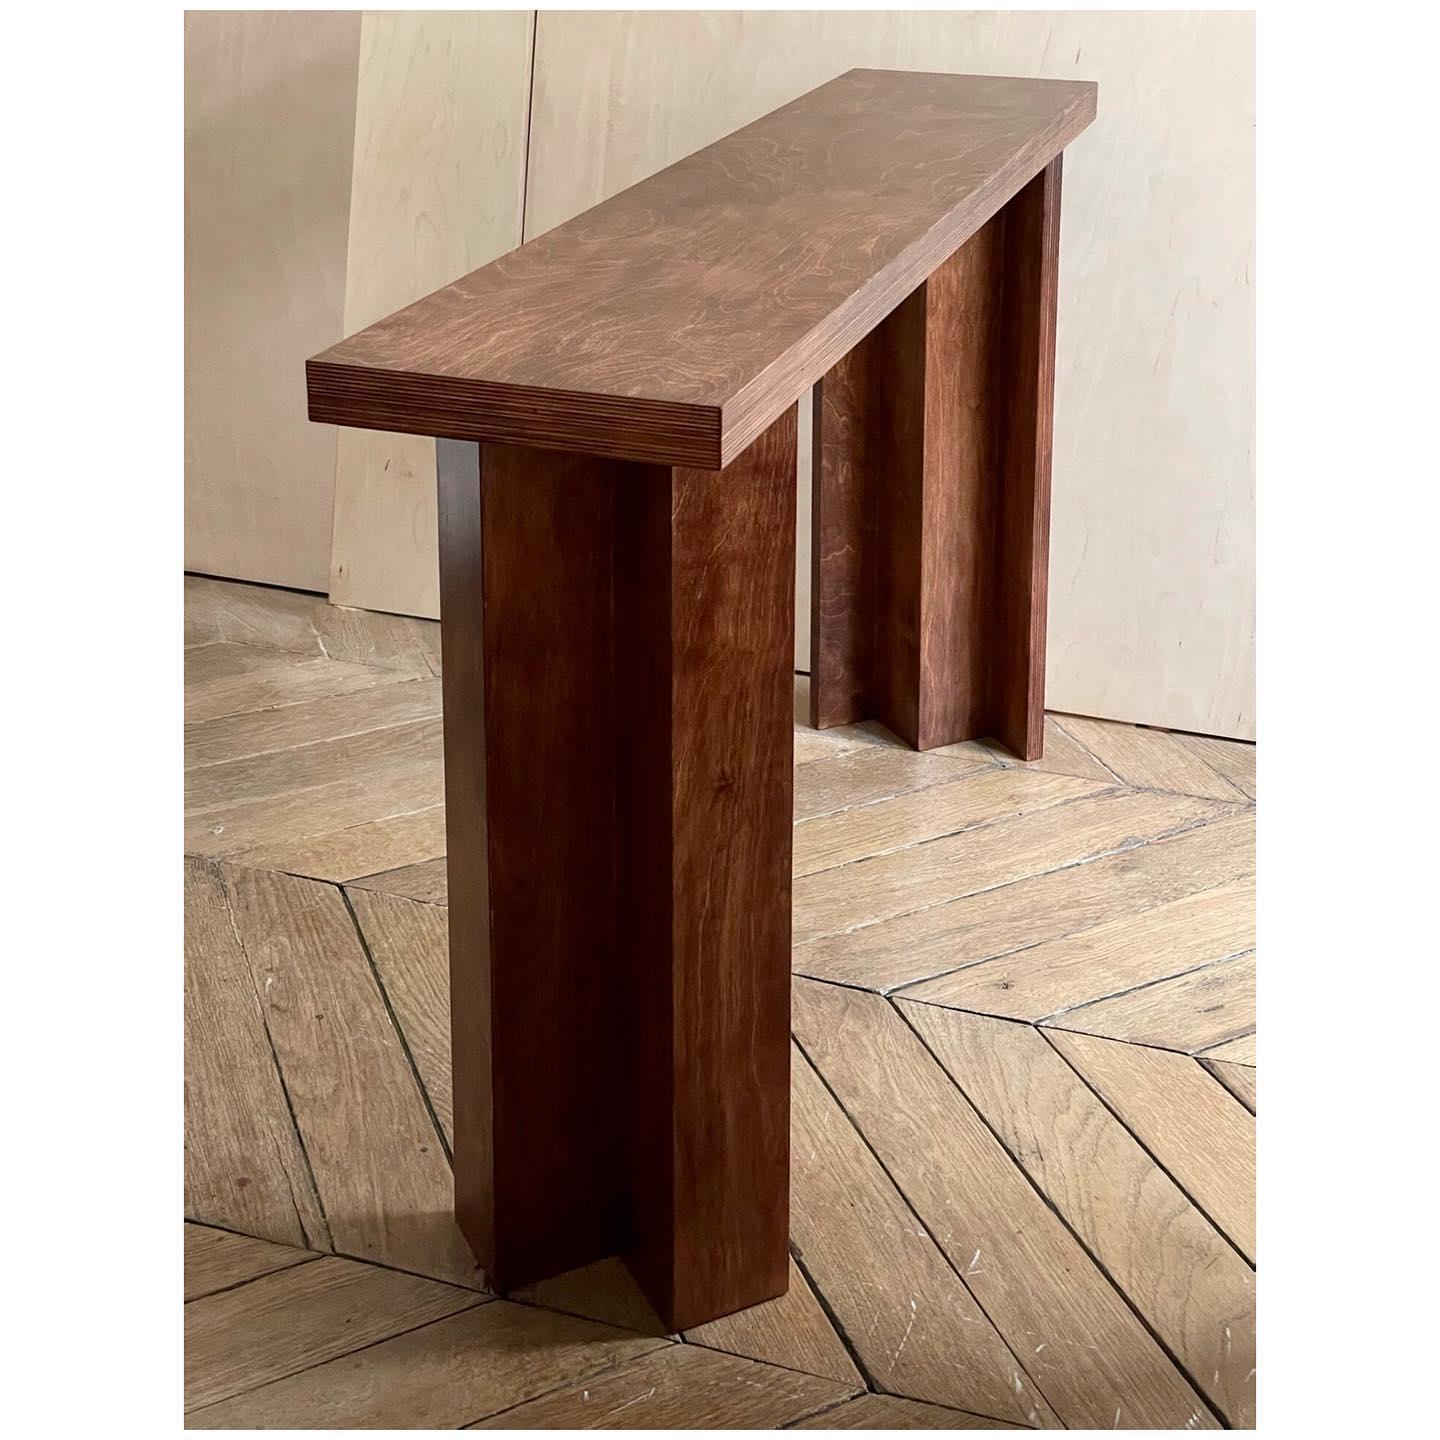 Unique console table by Goons 
Dimensions: W 120 x D 27 x H 74 cm
Materials: Wood
Dimensions can be adjusted +/- 10 cm

Goons is located in Paris France all of this desings are made in wood.